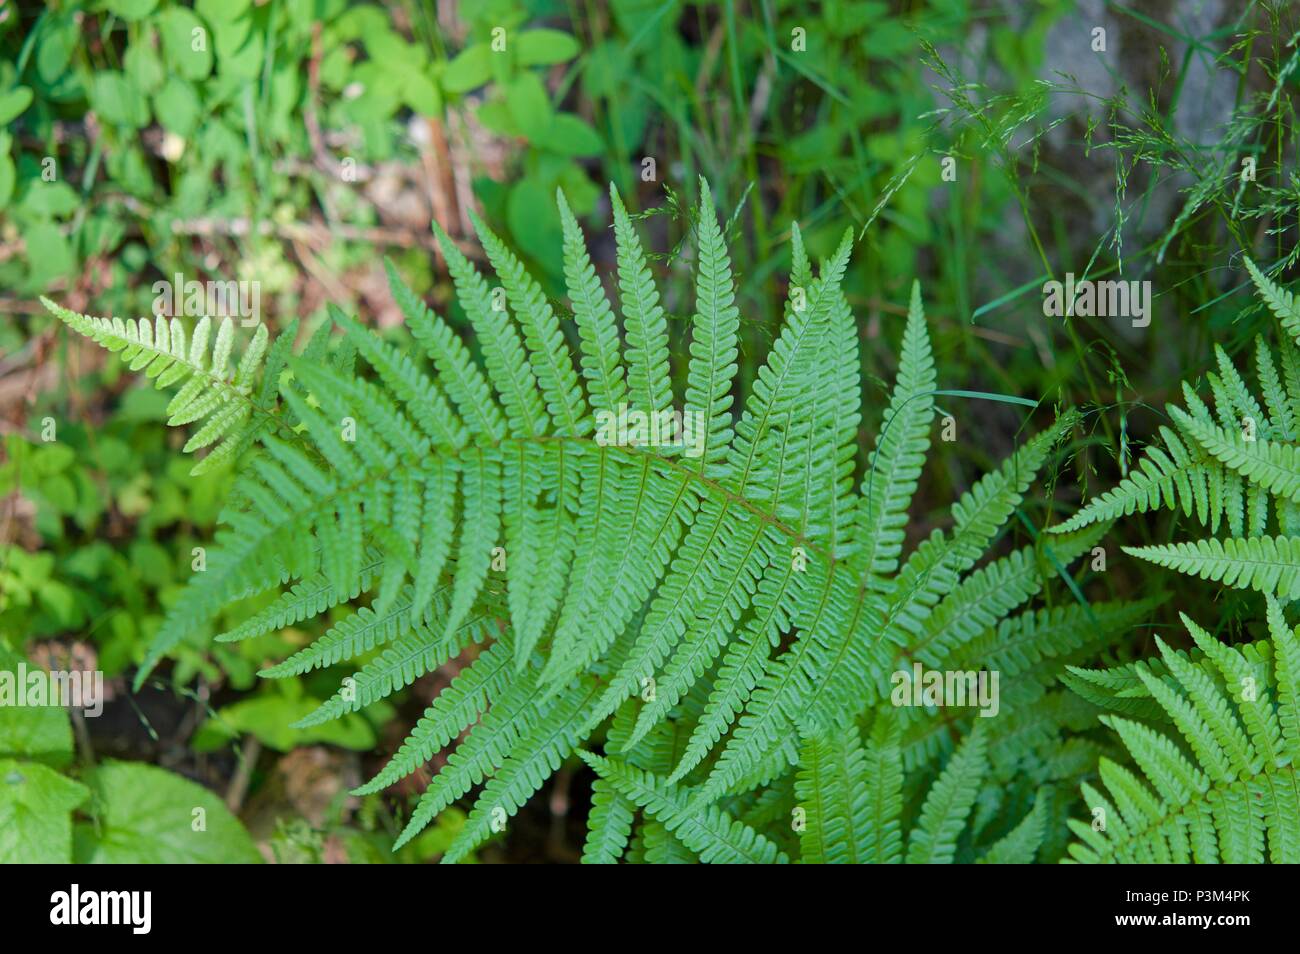 Groups of ferns Pterophyta class Stock Photo